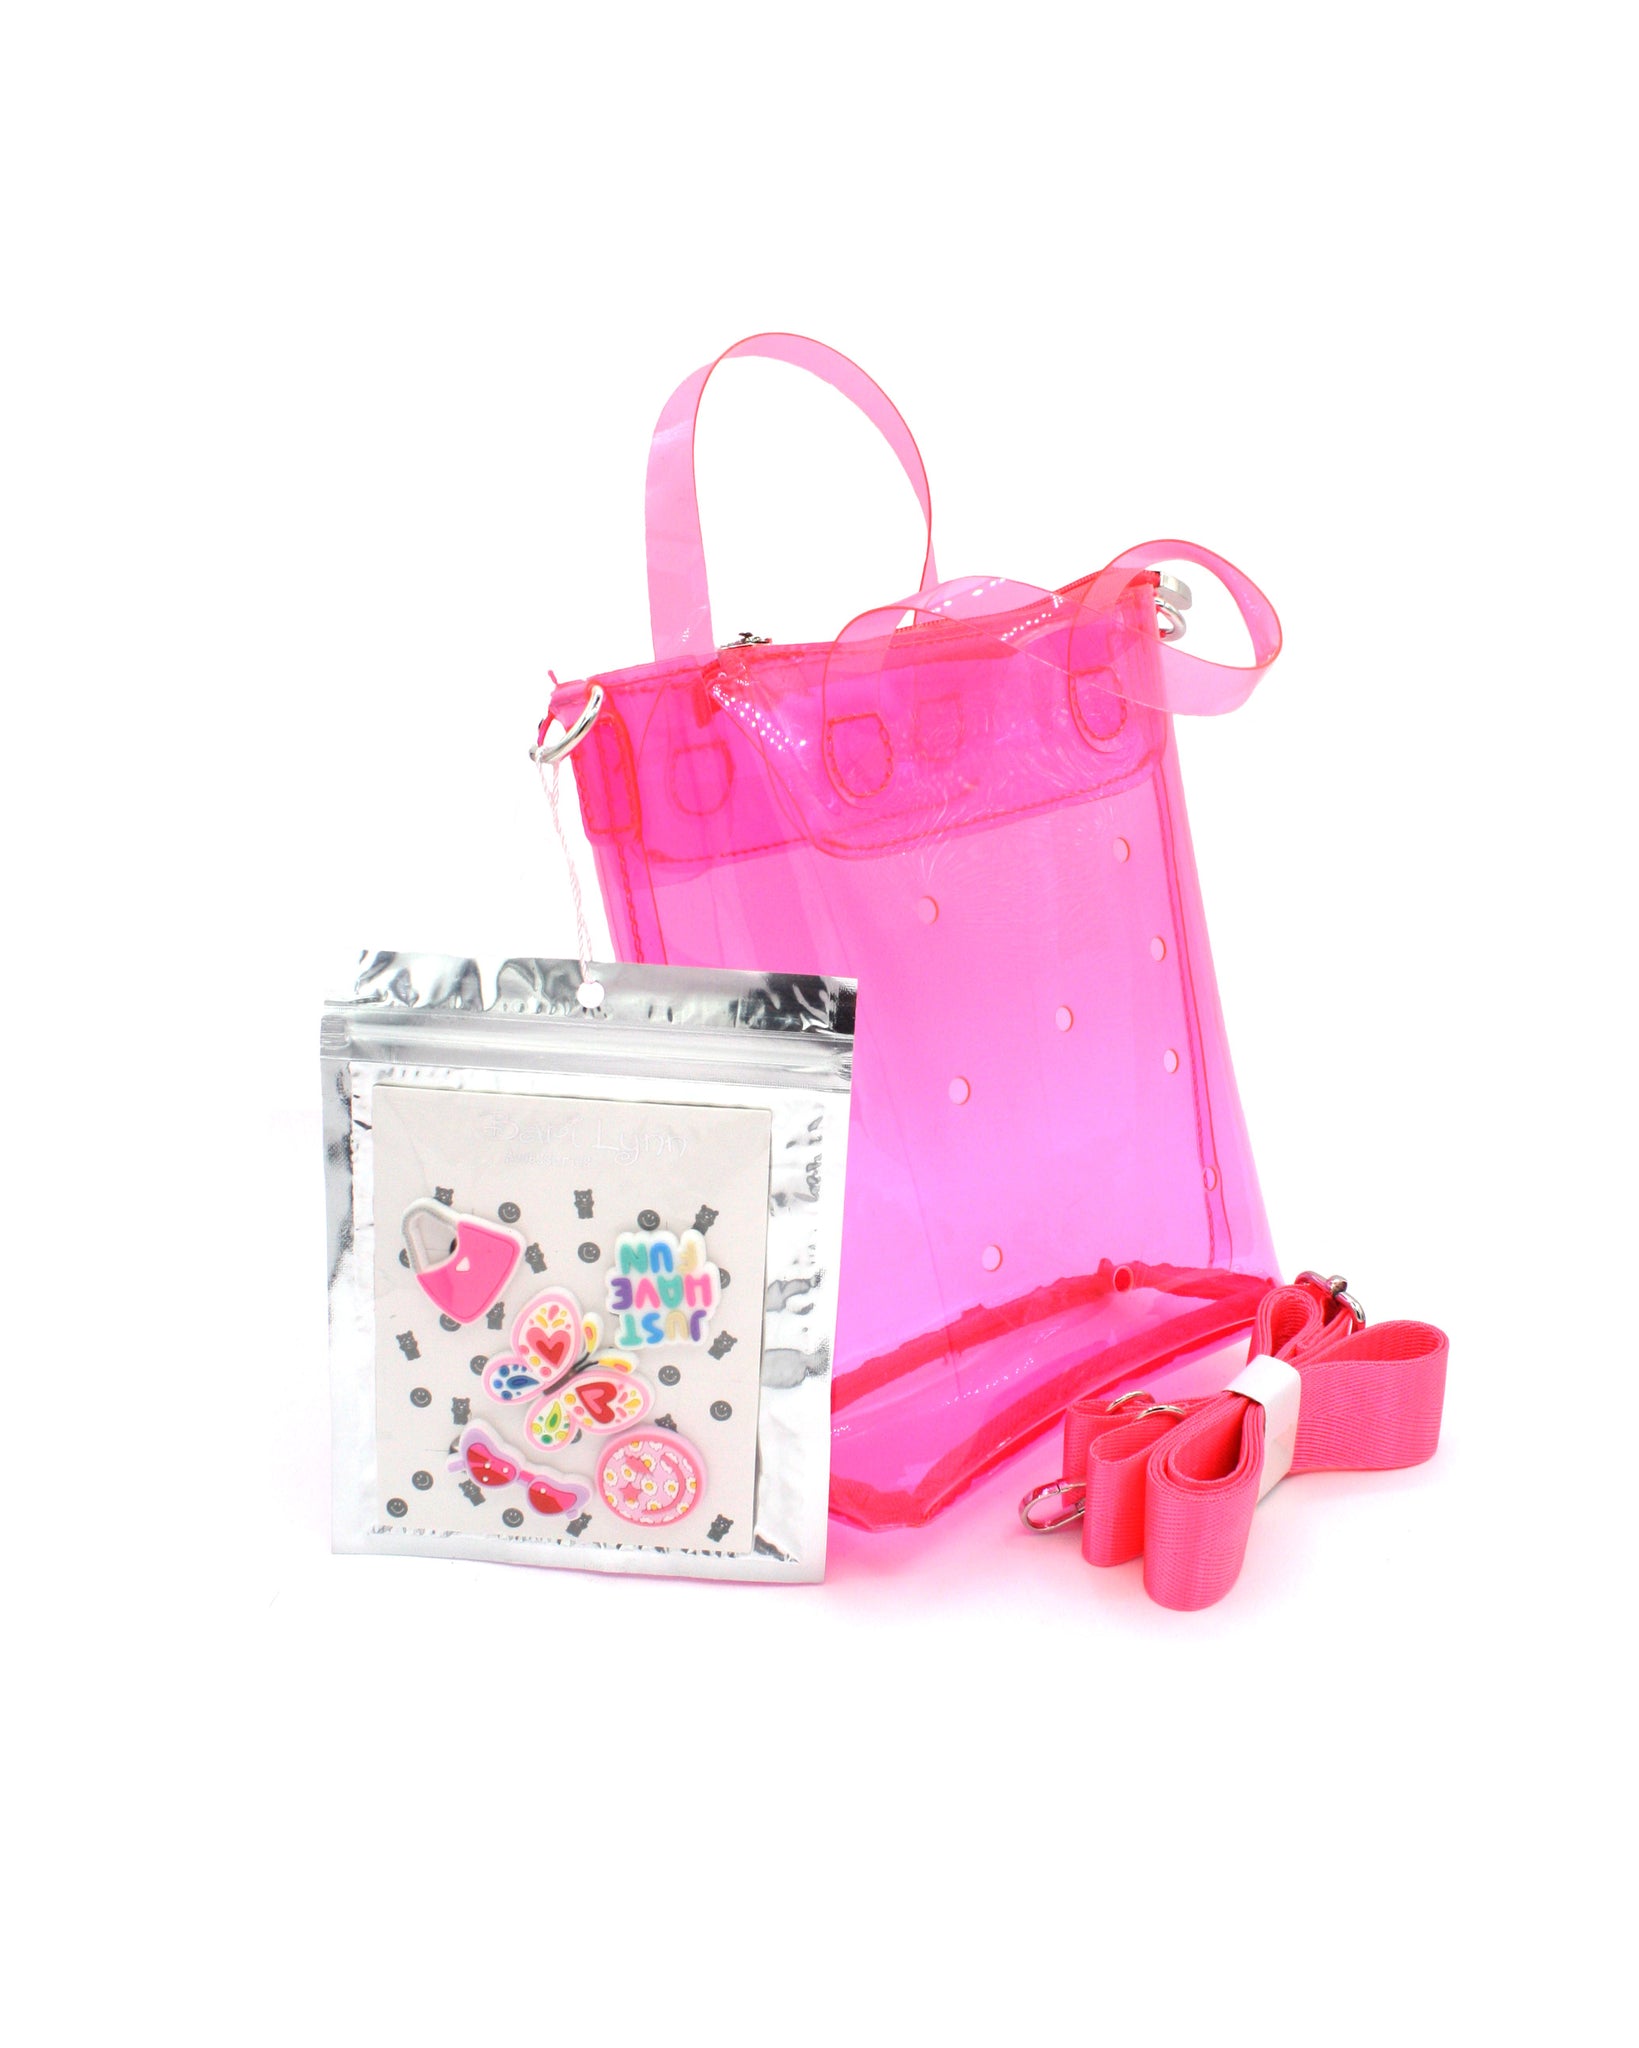 TOTE HANDLE CROSSBODY BAG W/ADDED CHARMS